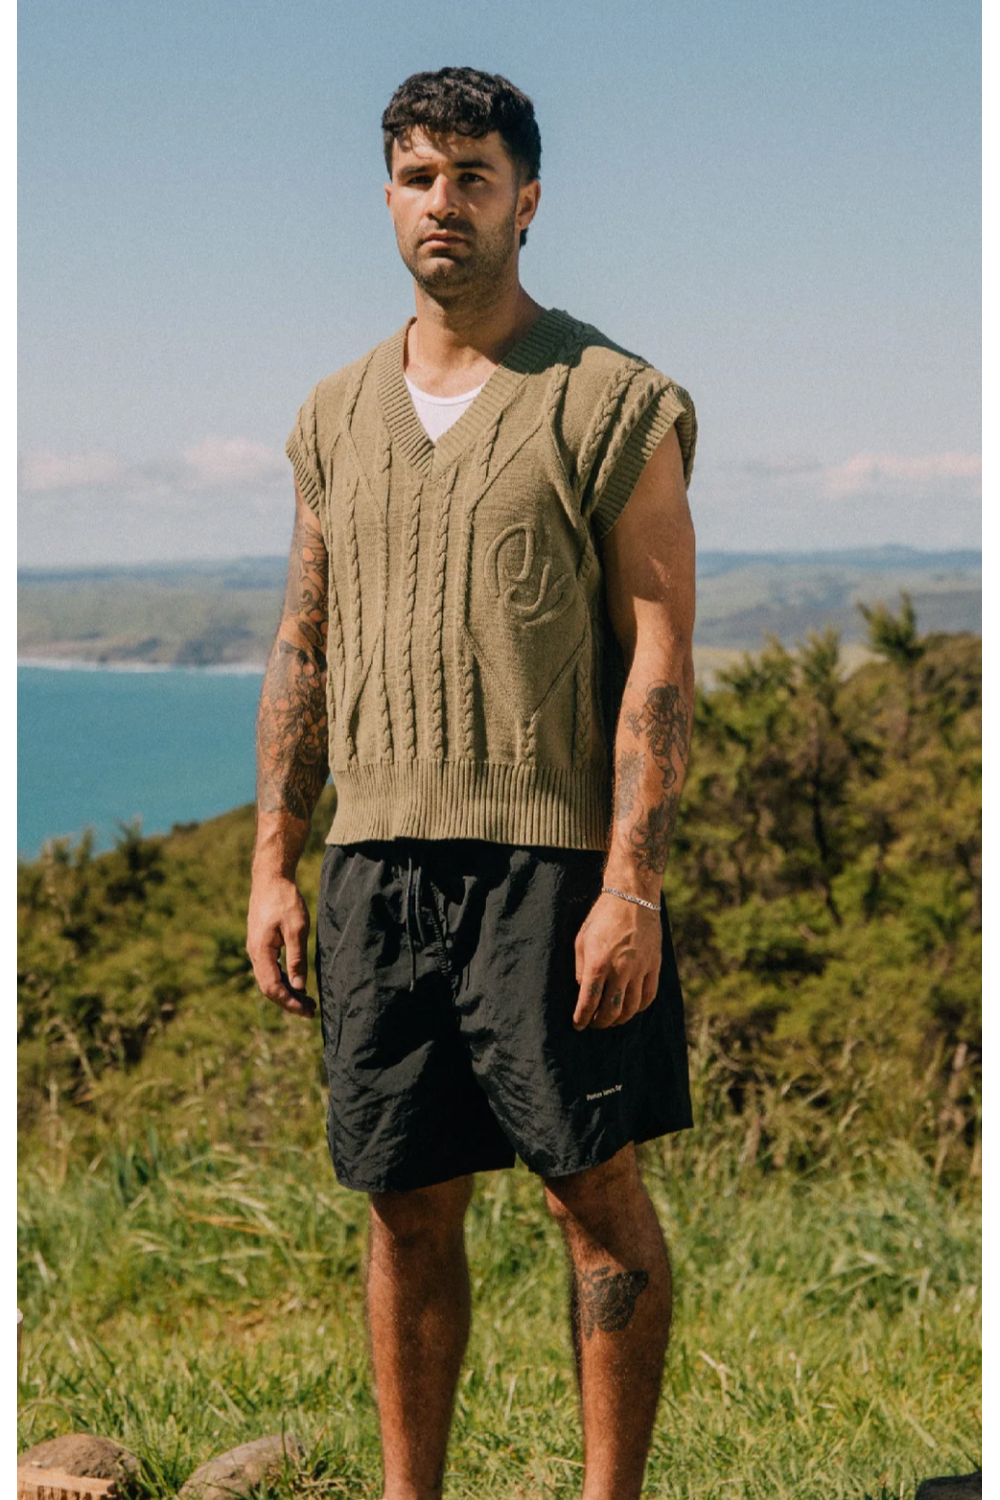 CABLE-KNIT CROPPED VEST / OLIVE CABLE-KNIT | PORTER JAMES SPORTS | Mad About The Boy